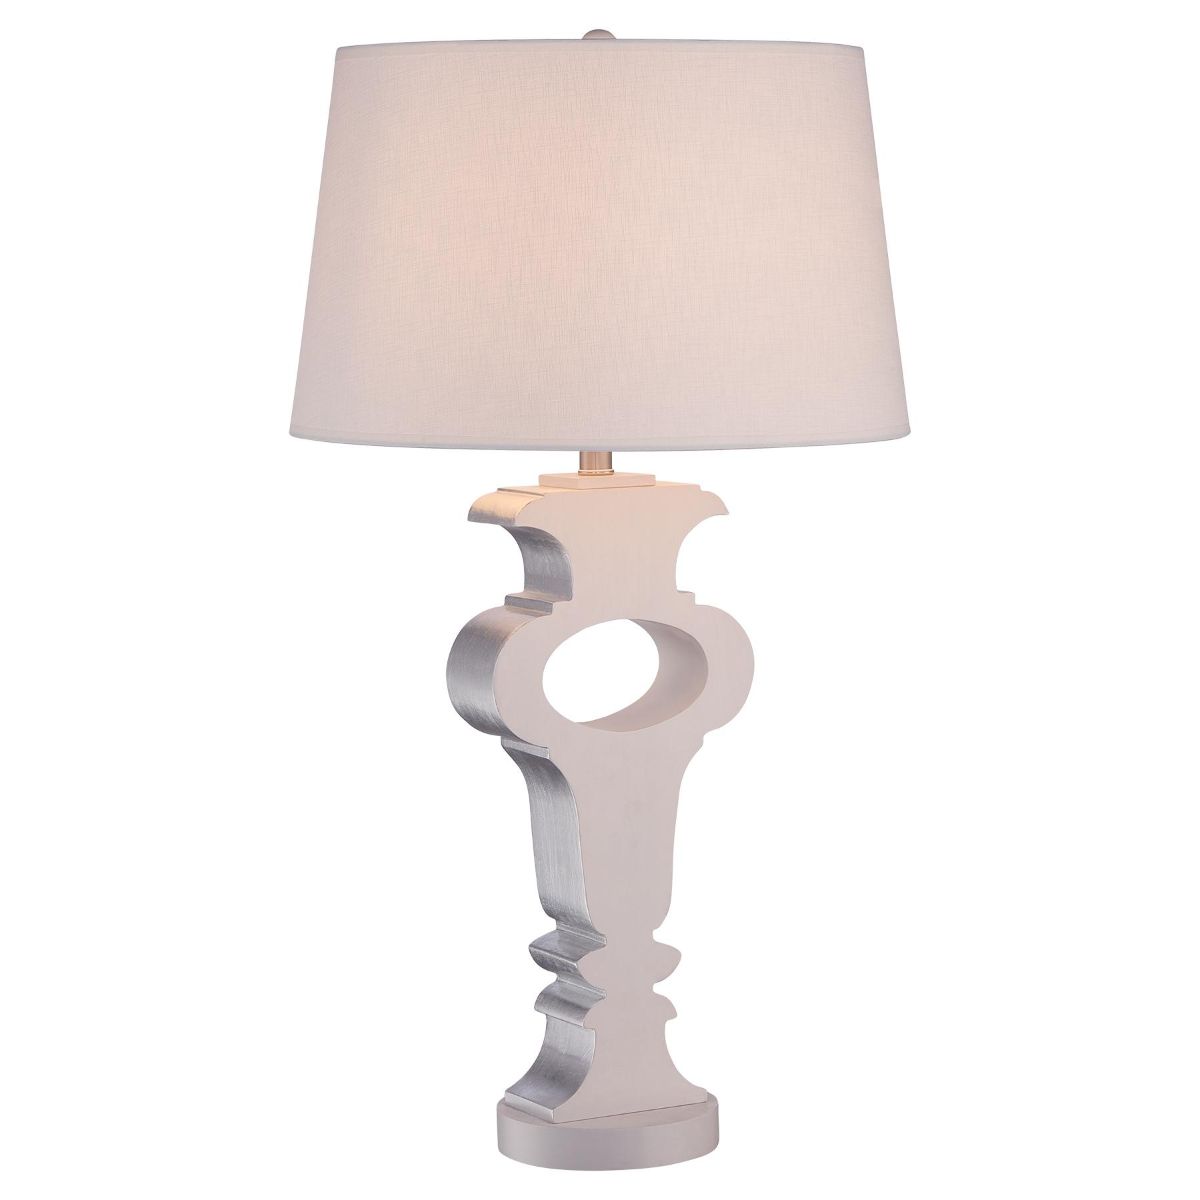 Ambience 1 Light Table Lamp with Cream and Silver Leaf Highlights Finish